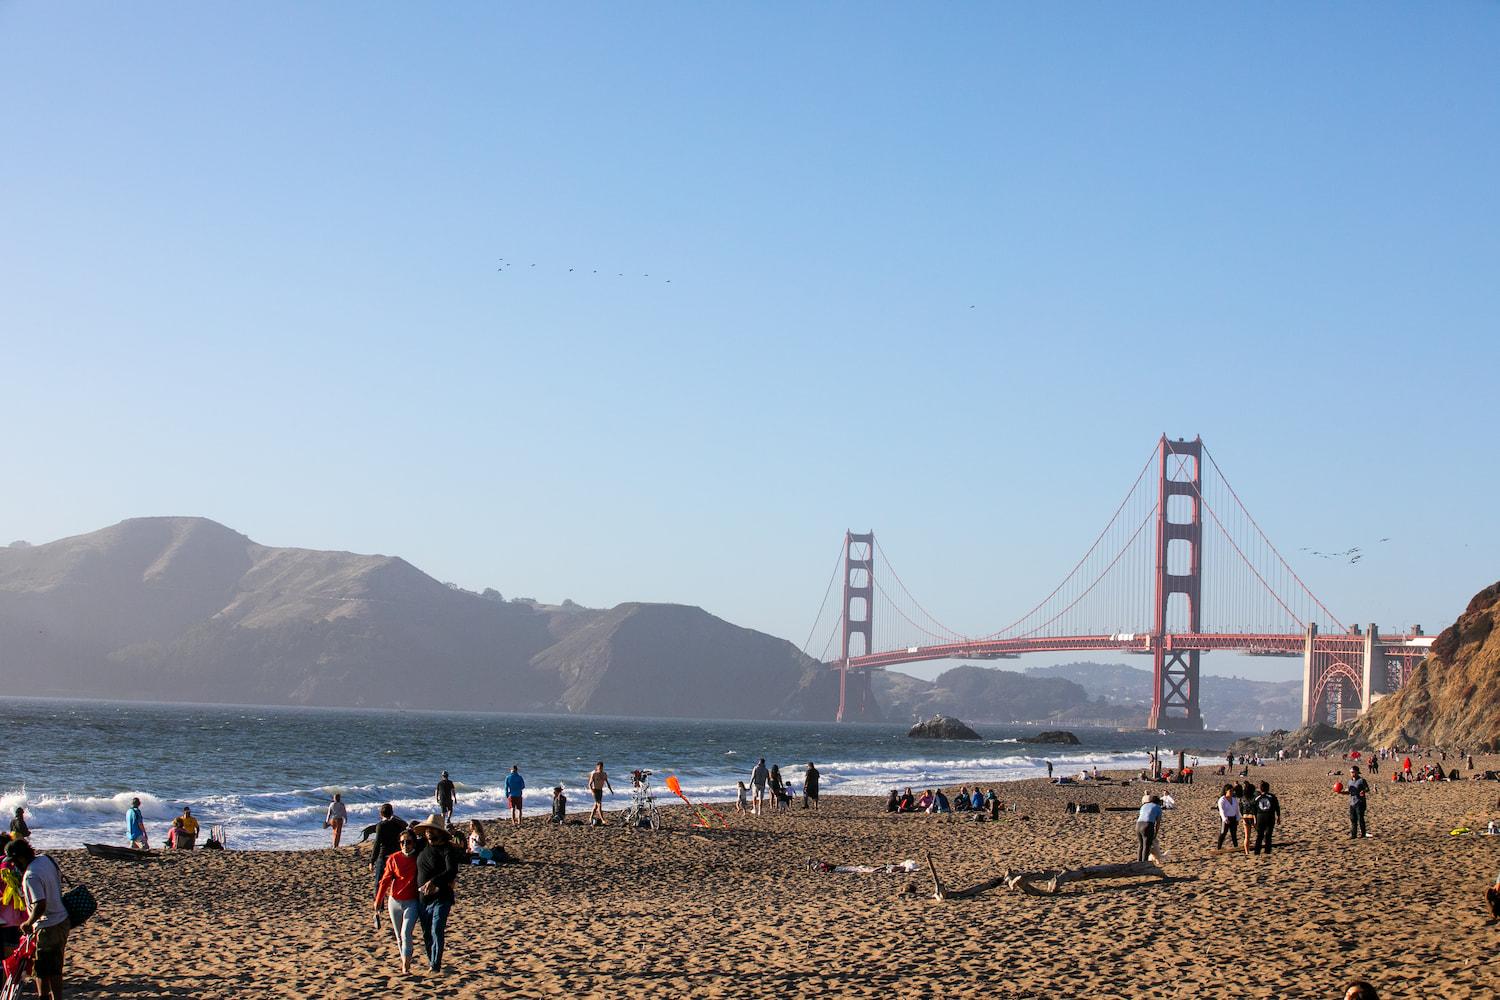 A dozen people walking or sitting on the sand at Baker Beach.